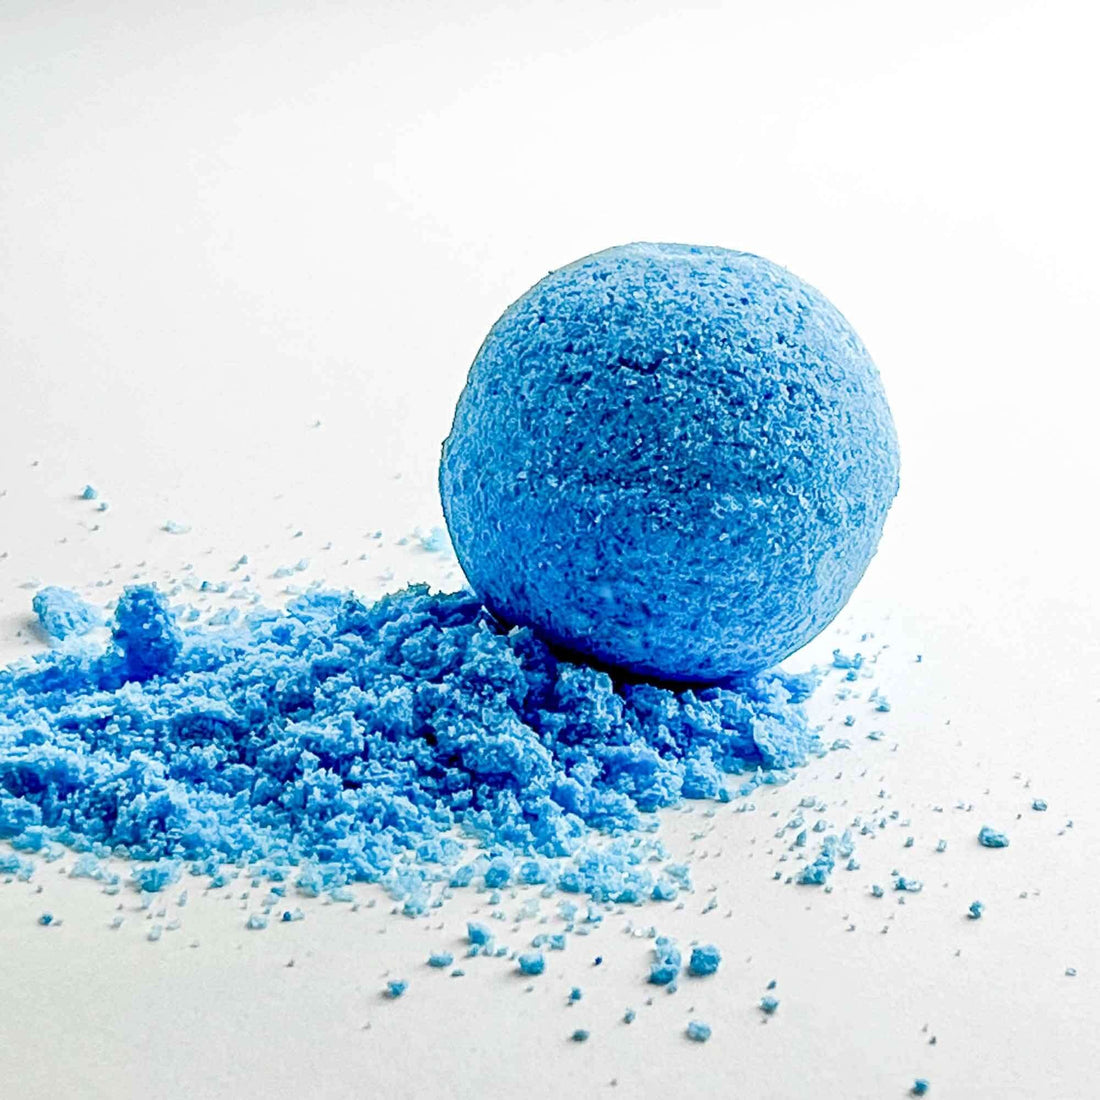 Indulge in a Relaxing Day at the Spa with our Aromatherapy Bath Bombs